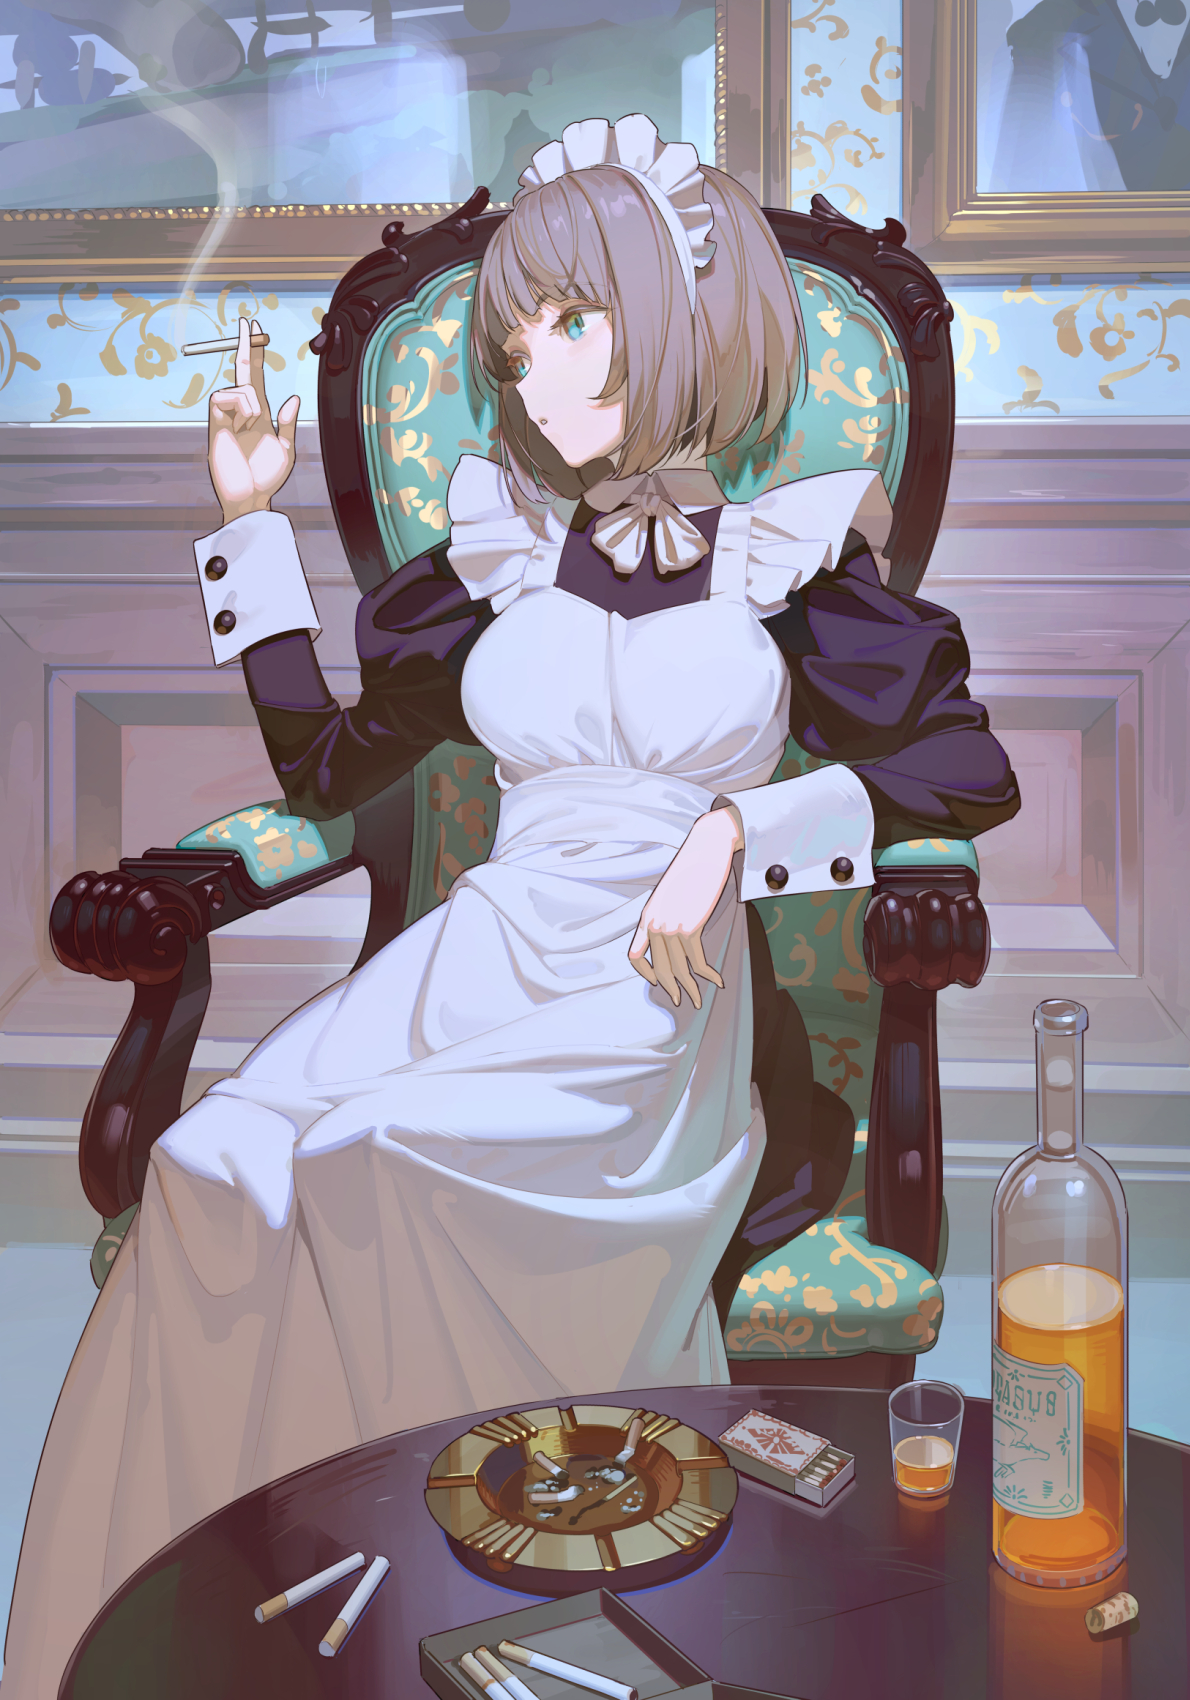 Anime Anime Girls Maid Smoking Short Hair Brunette Cigarettes Sitting Maid Outfit Blue Eyes Matches  1190x1700